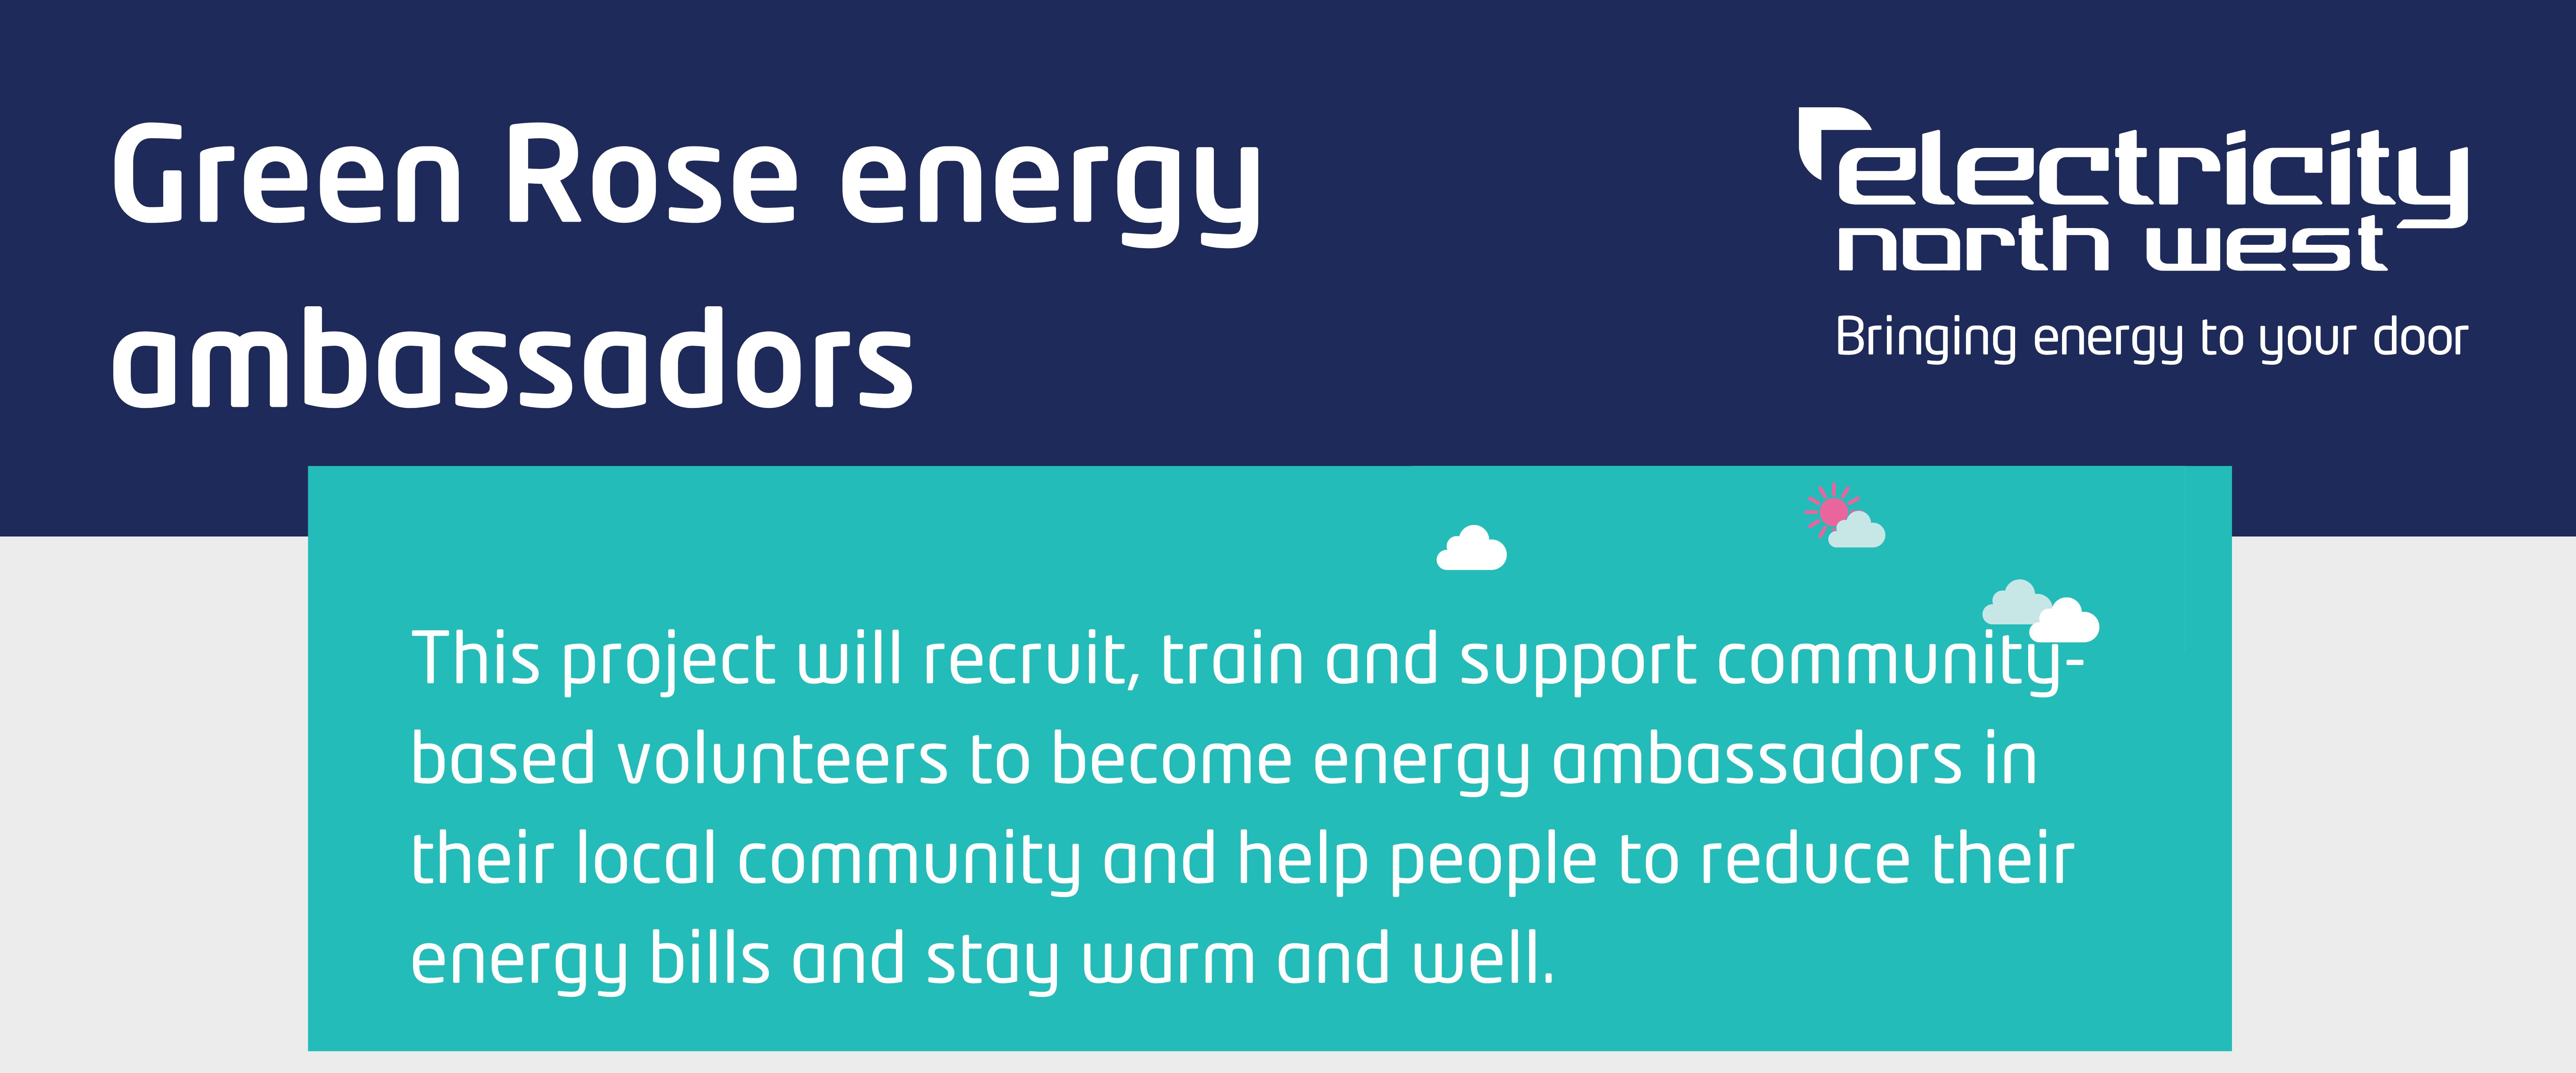 Green Rose energy ambassadors, This project will recruit, train and support community-based volunteers to become energy ambassadors in their local community and help people to reduce their energy bills and stay warm and well.